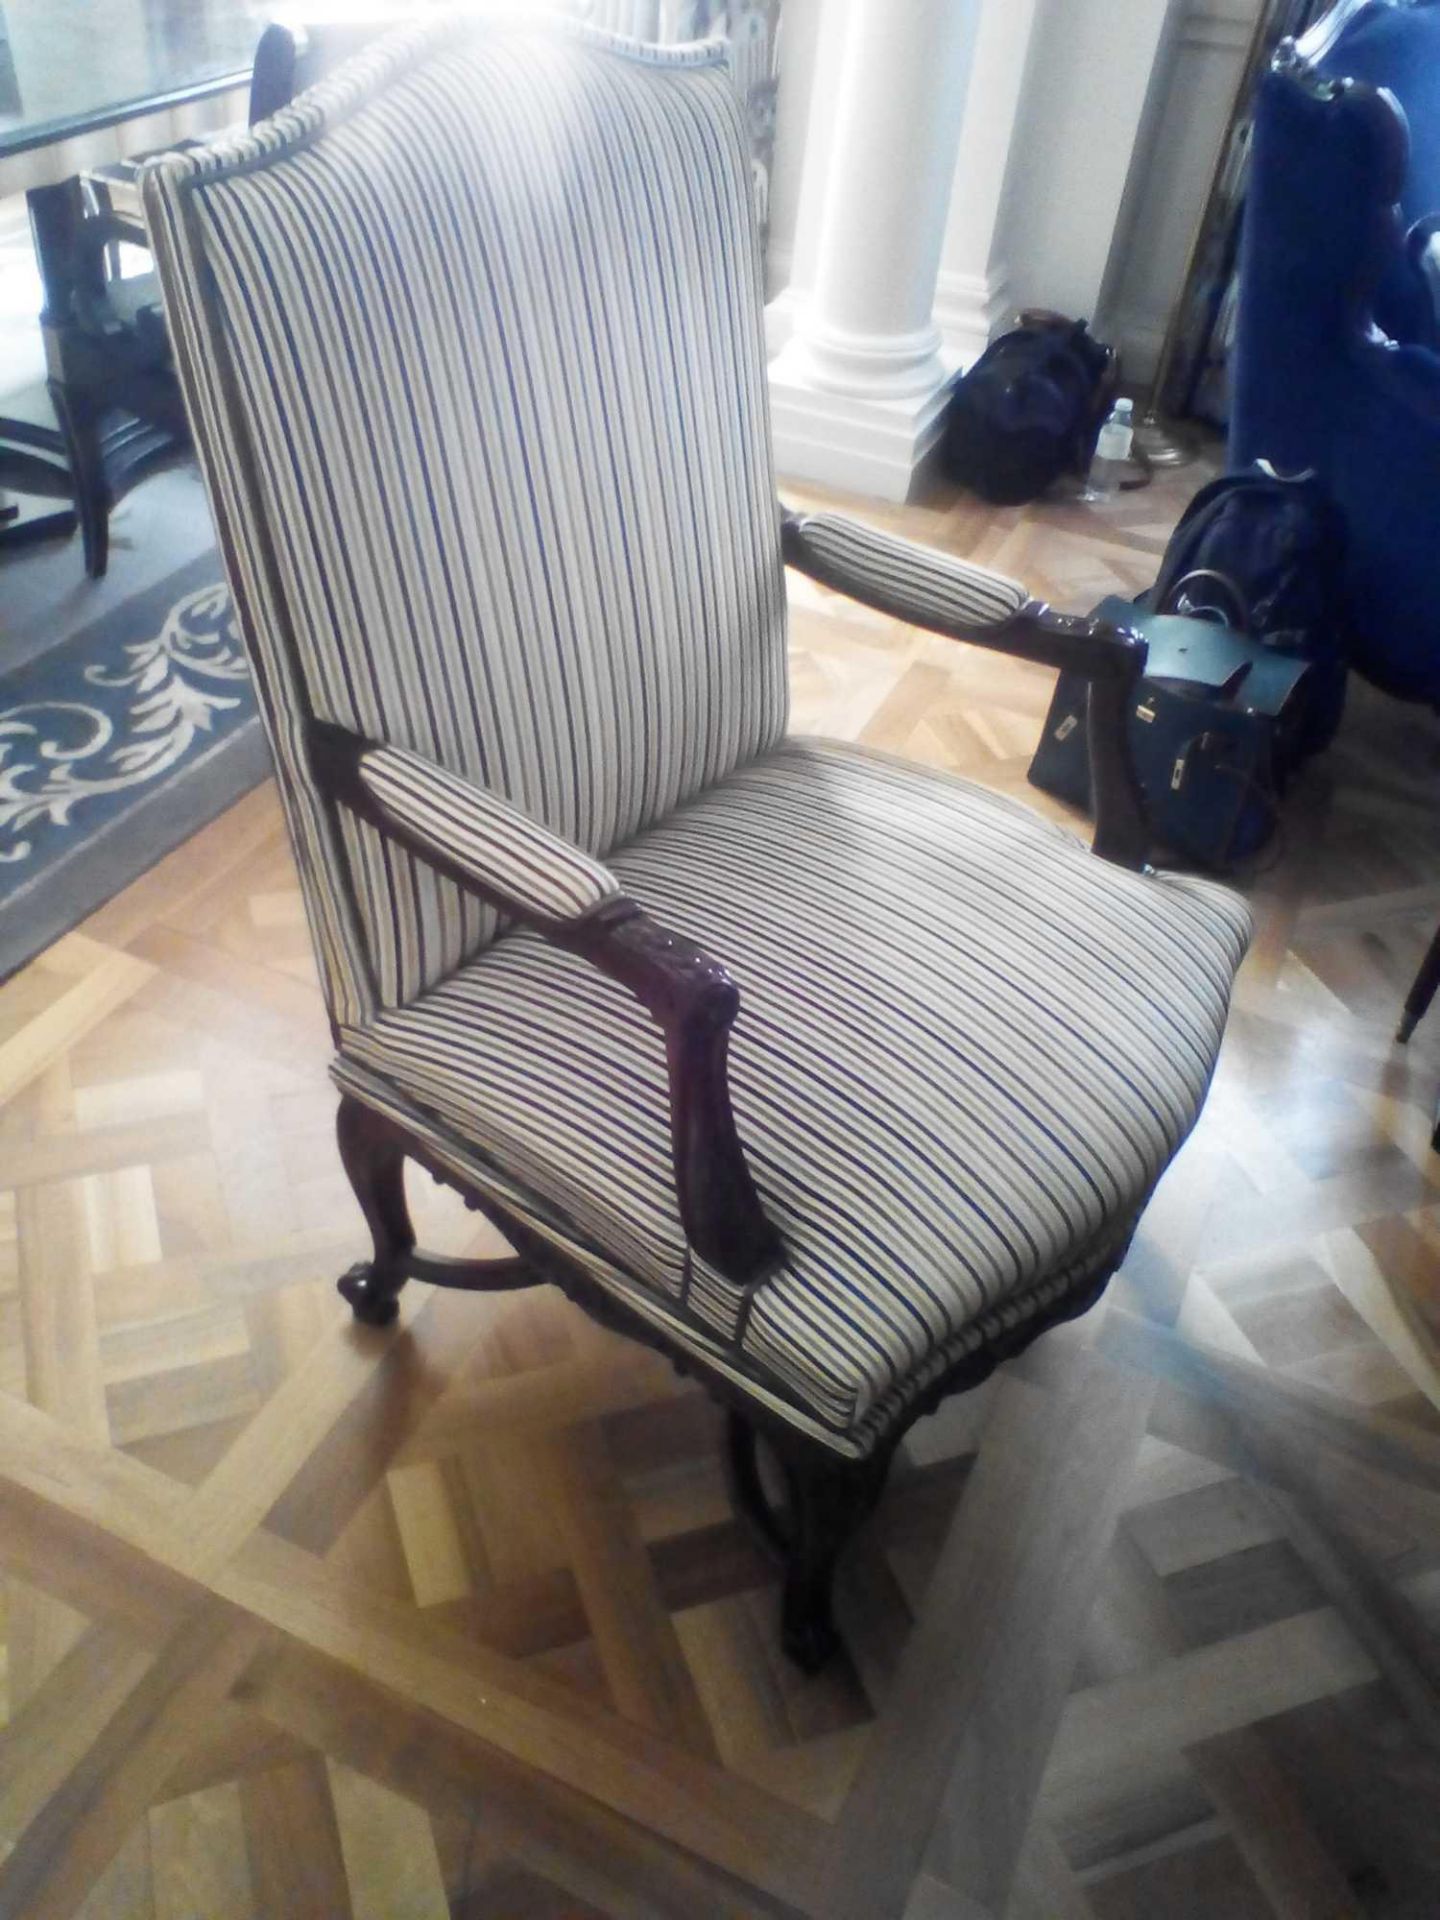 Accent Chair In Upholstered Striped Fabric 64 x 49 x 84cm Mounted On A Swivel Base (Room 102) - Bild 2 aus 2